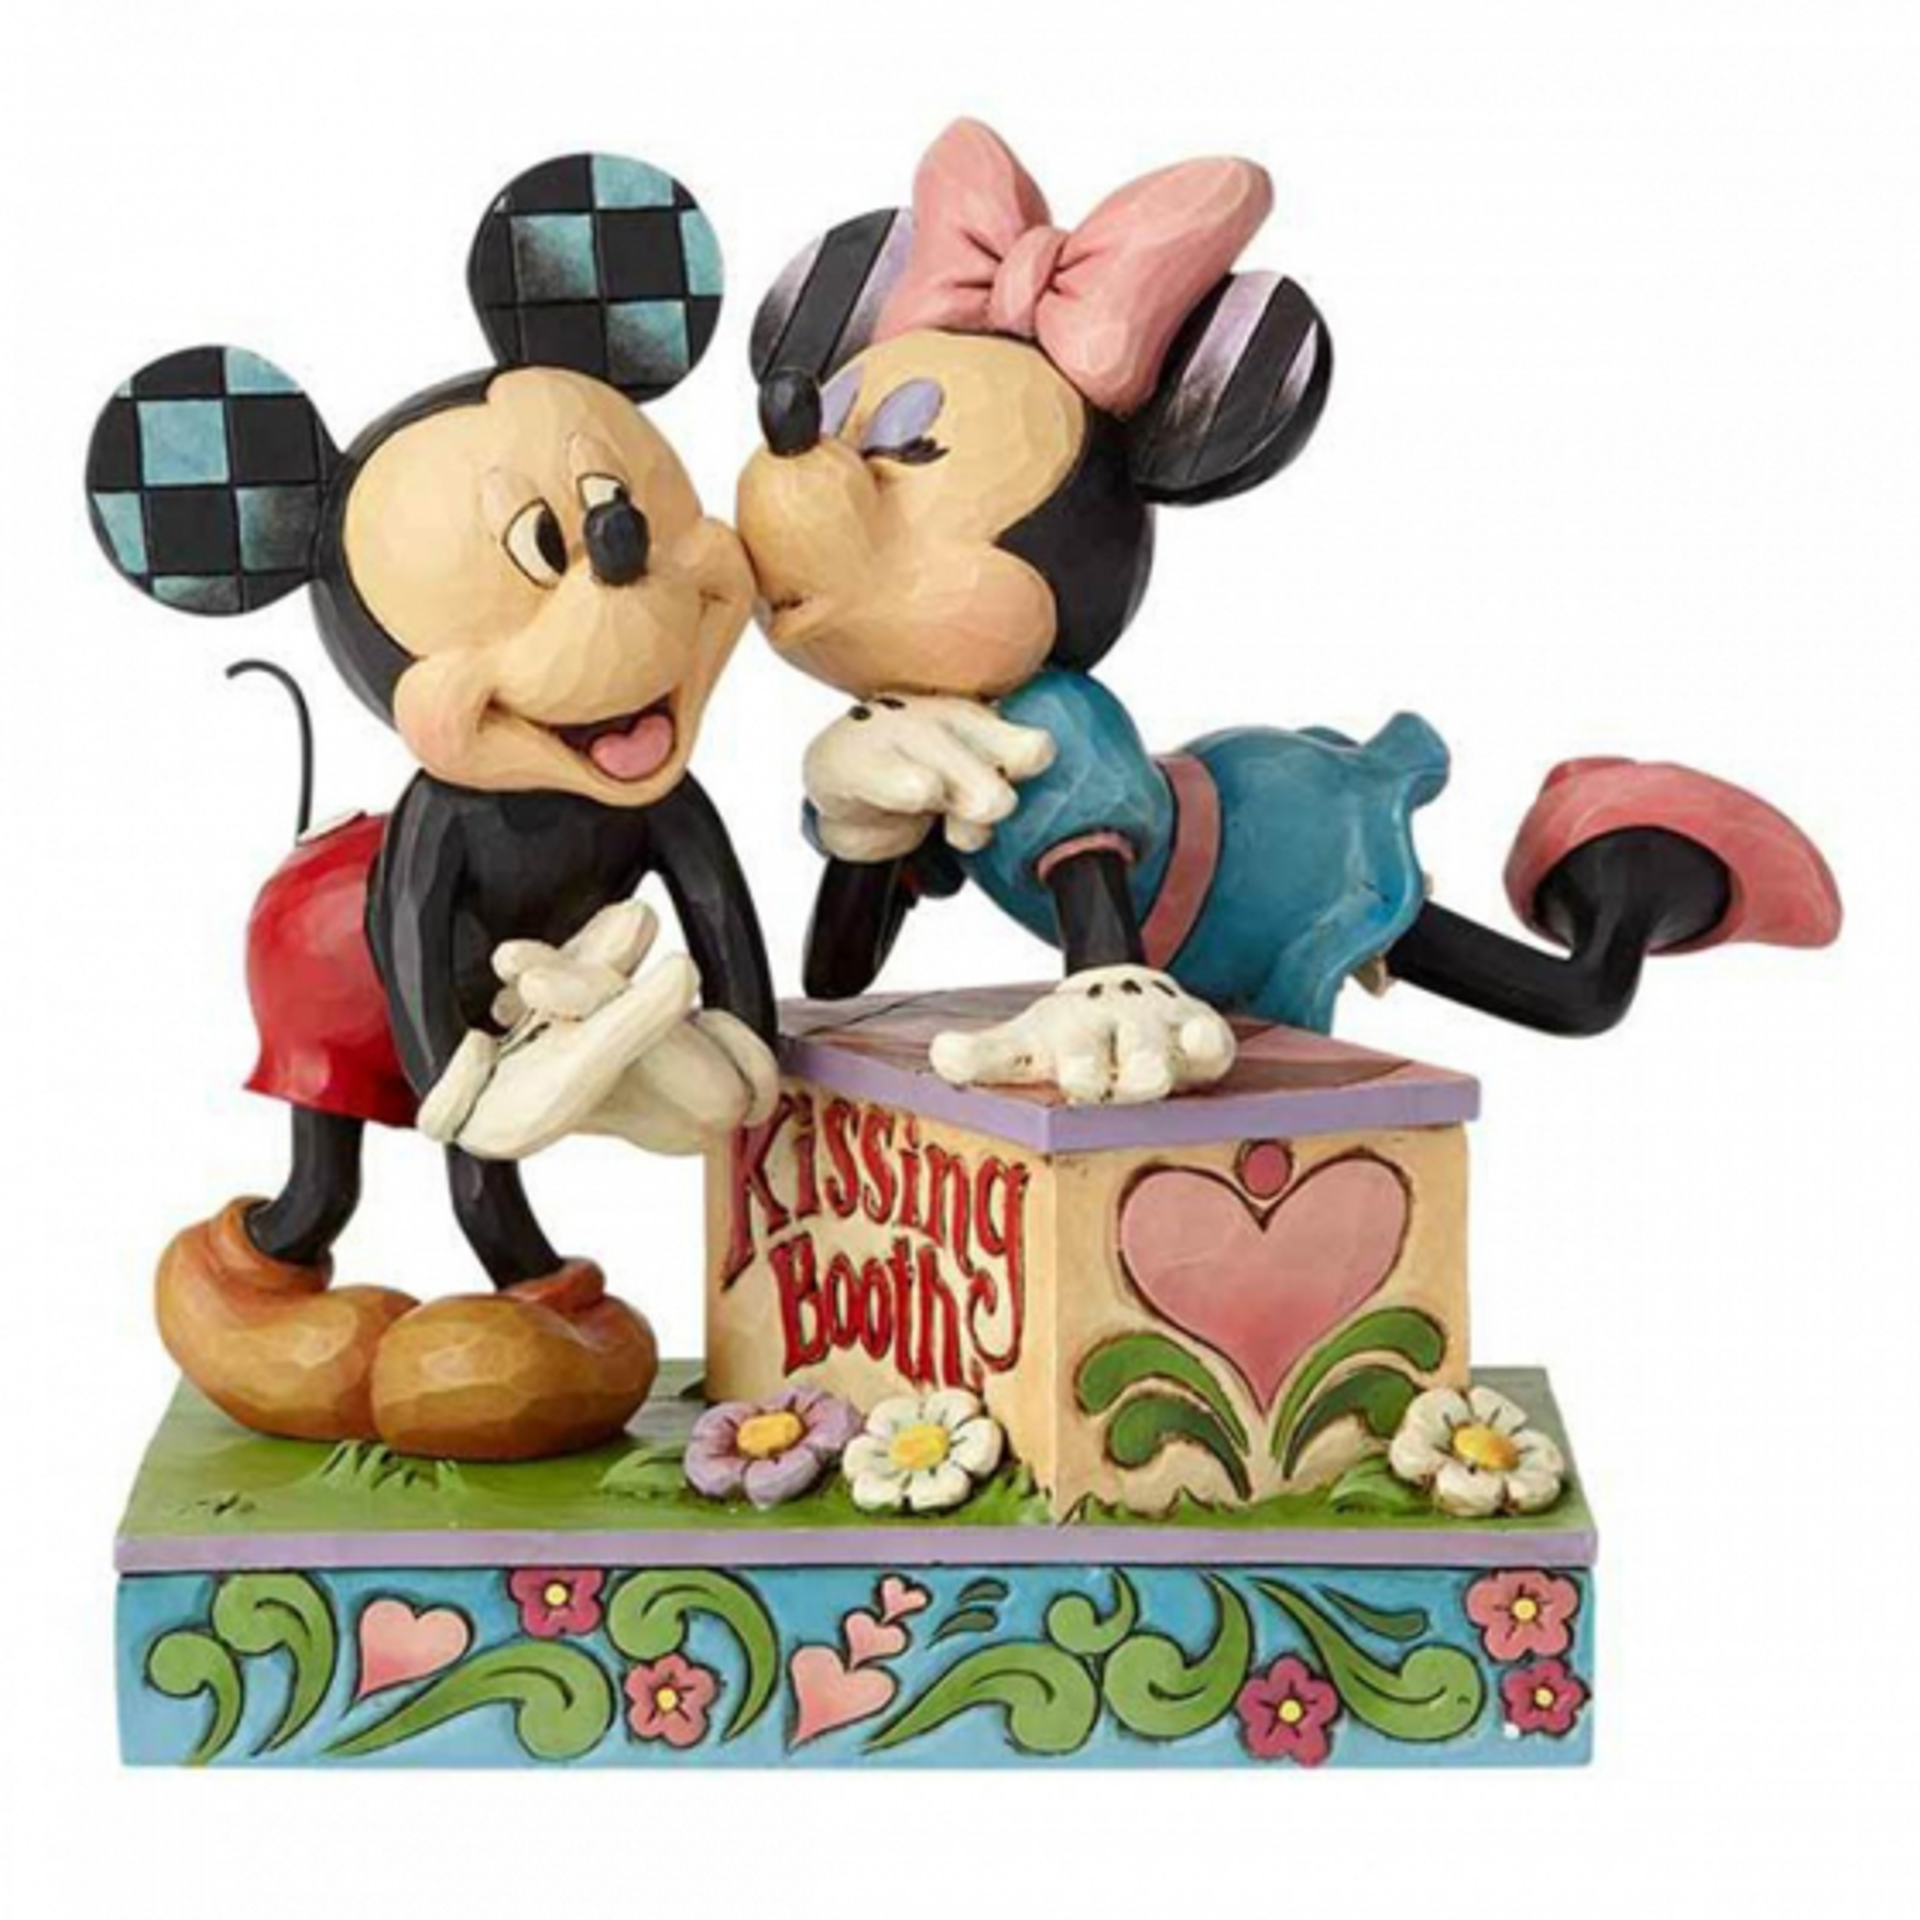 Enesco - Disney Kissing Booth (Mickey Mouse & Minnie Mouse Figurine)